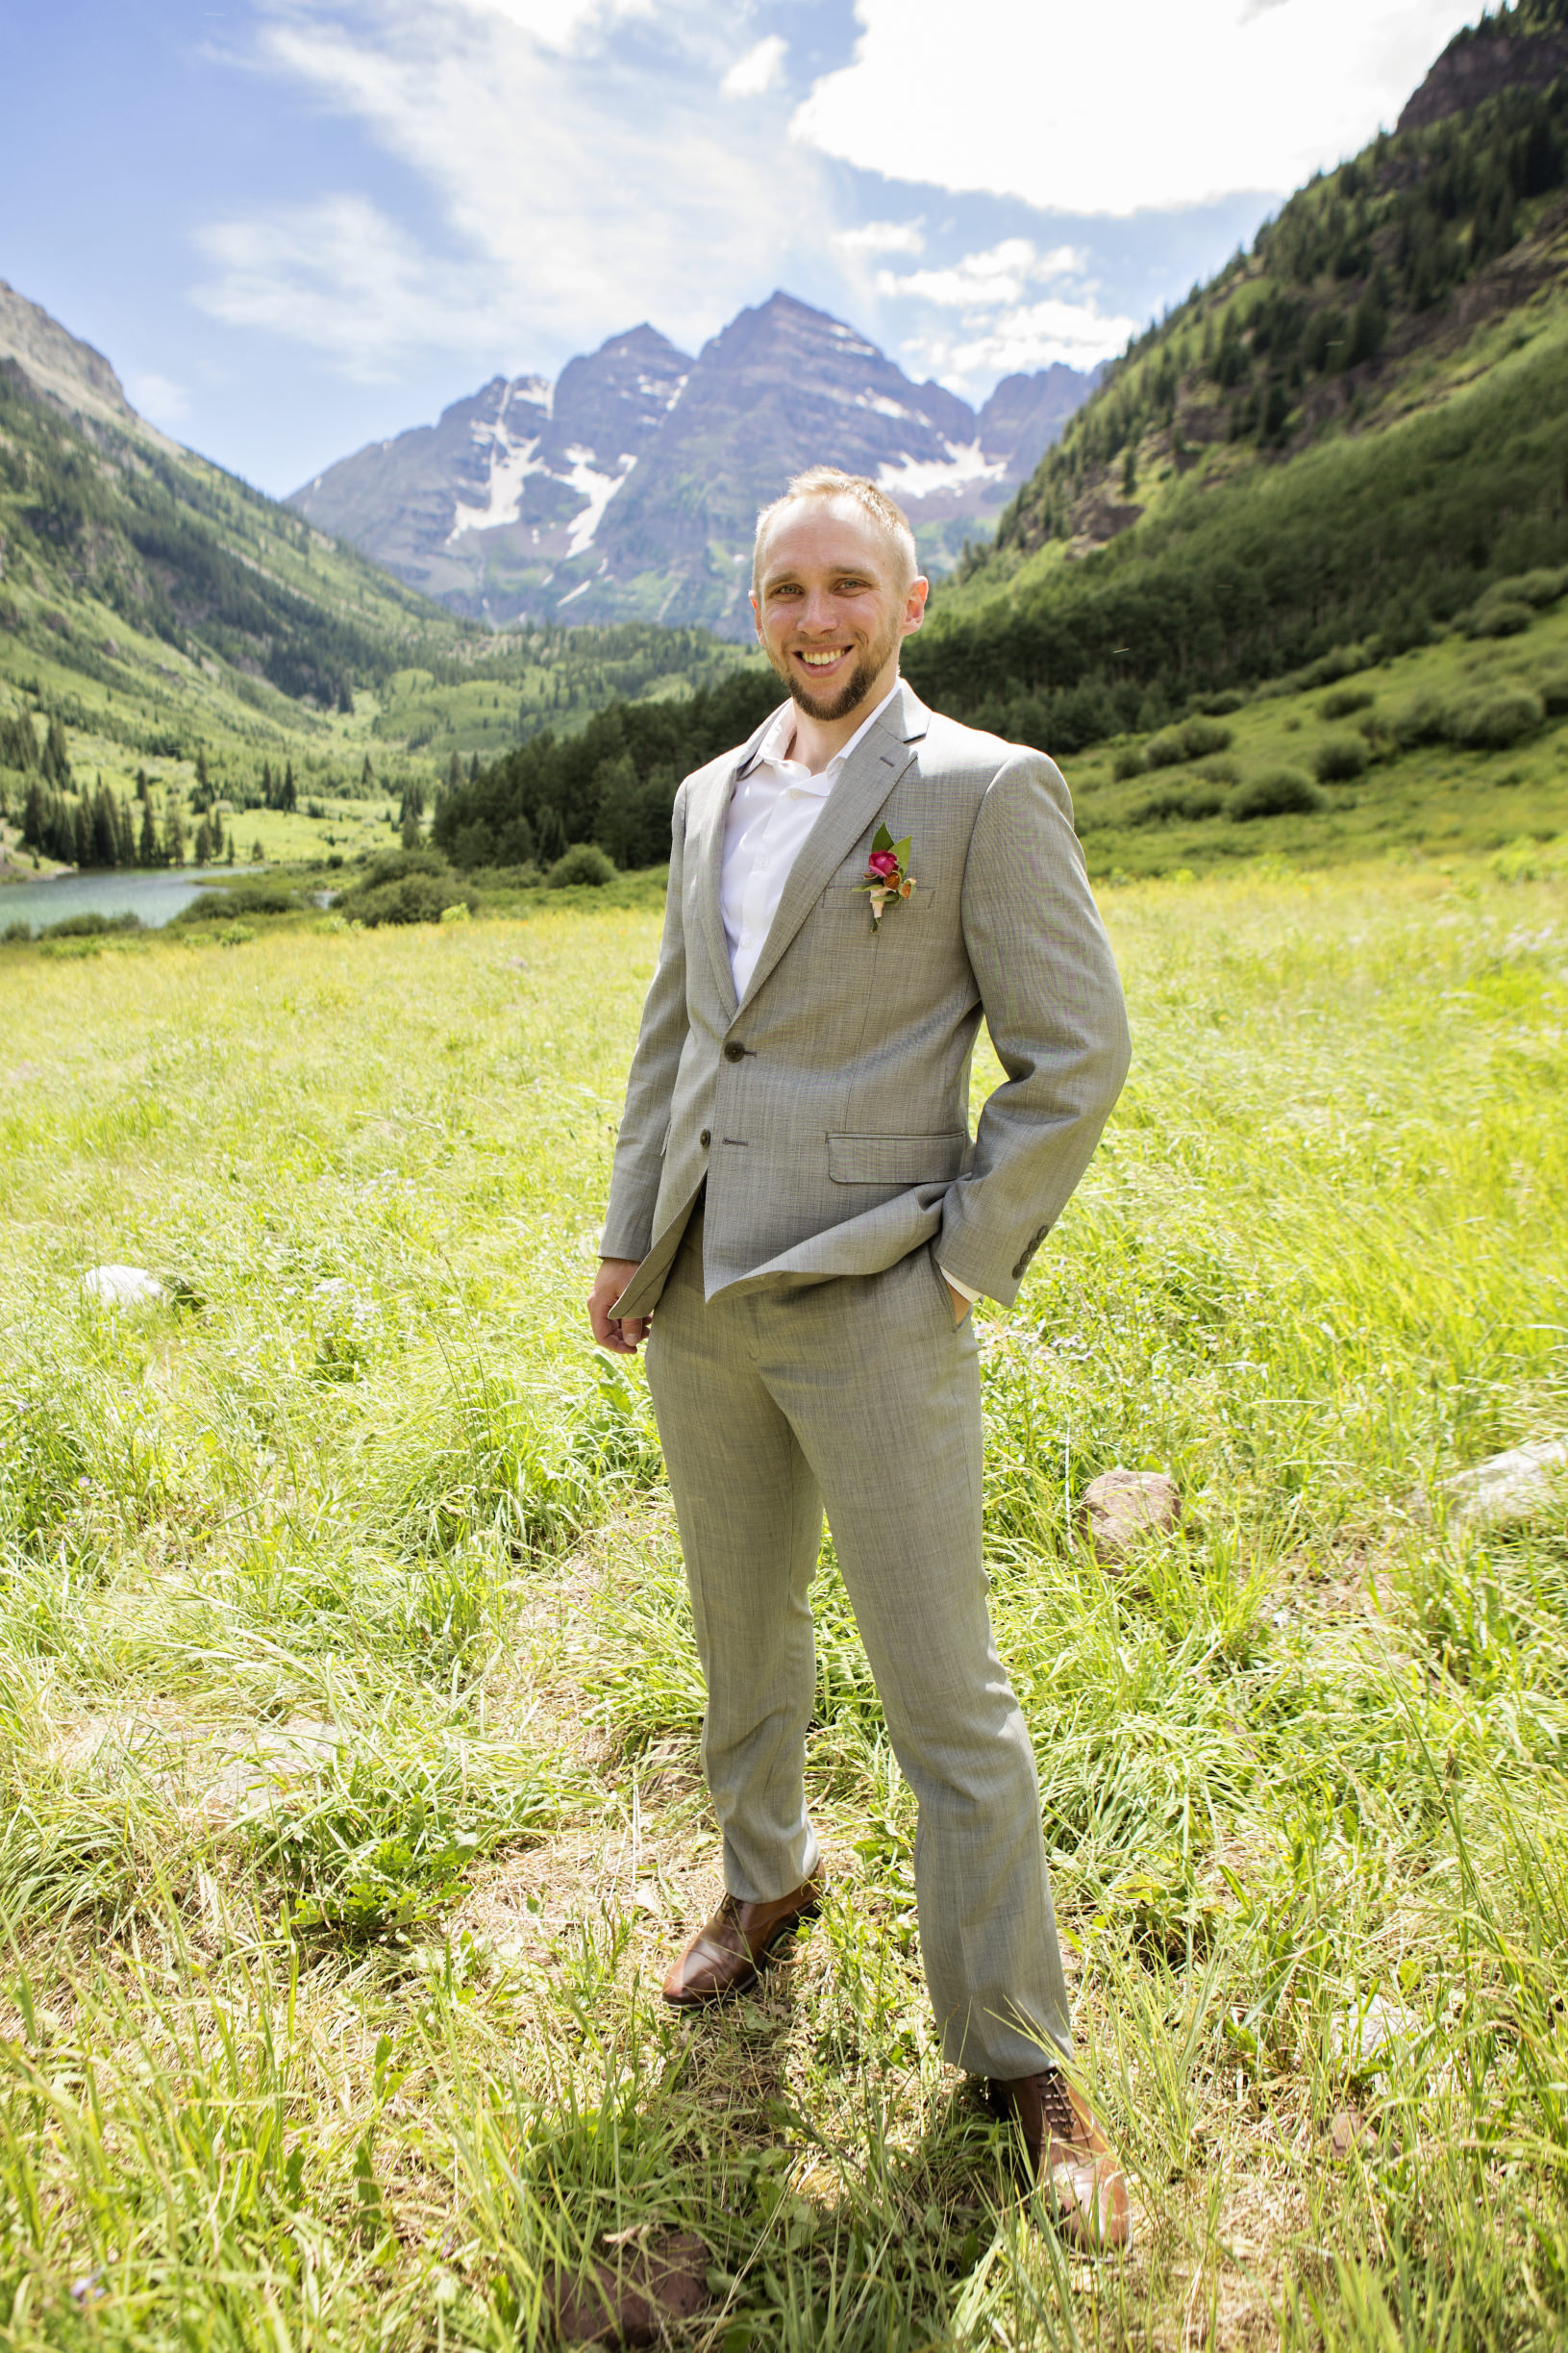 Grooms Portrait at Maroon Bells | Windfirm Photography